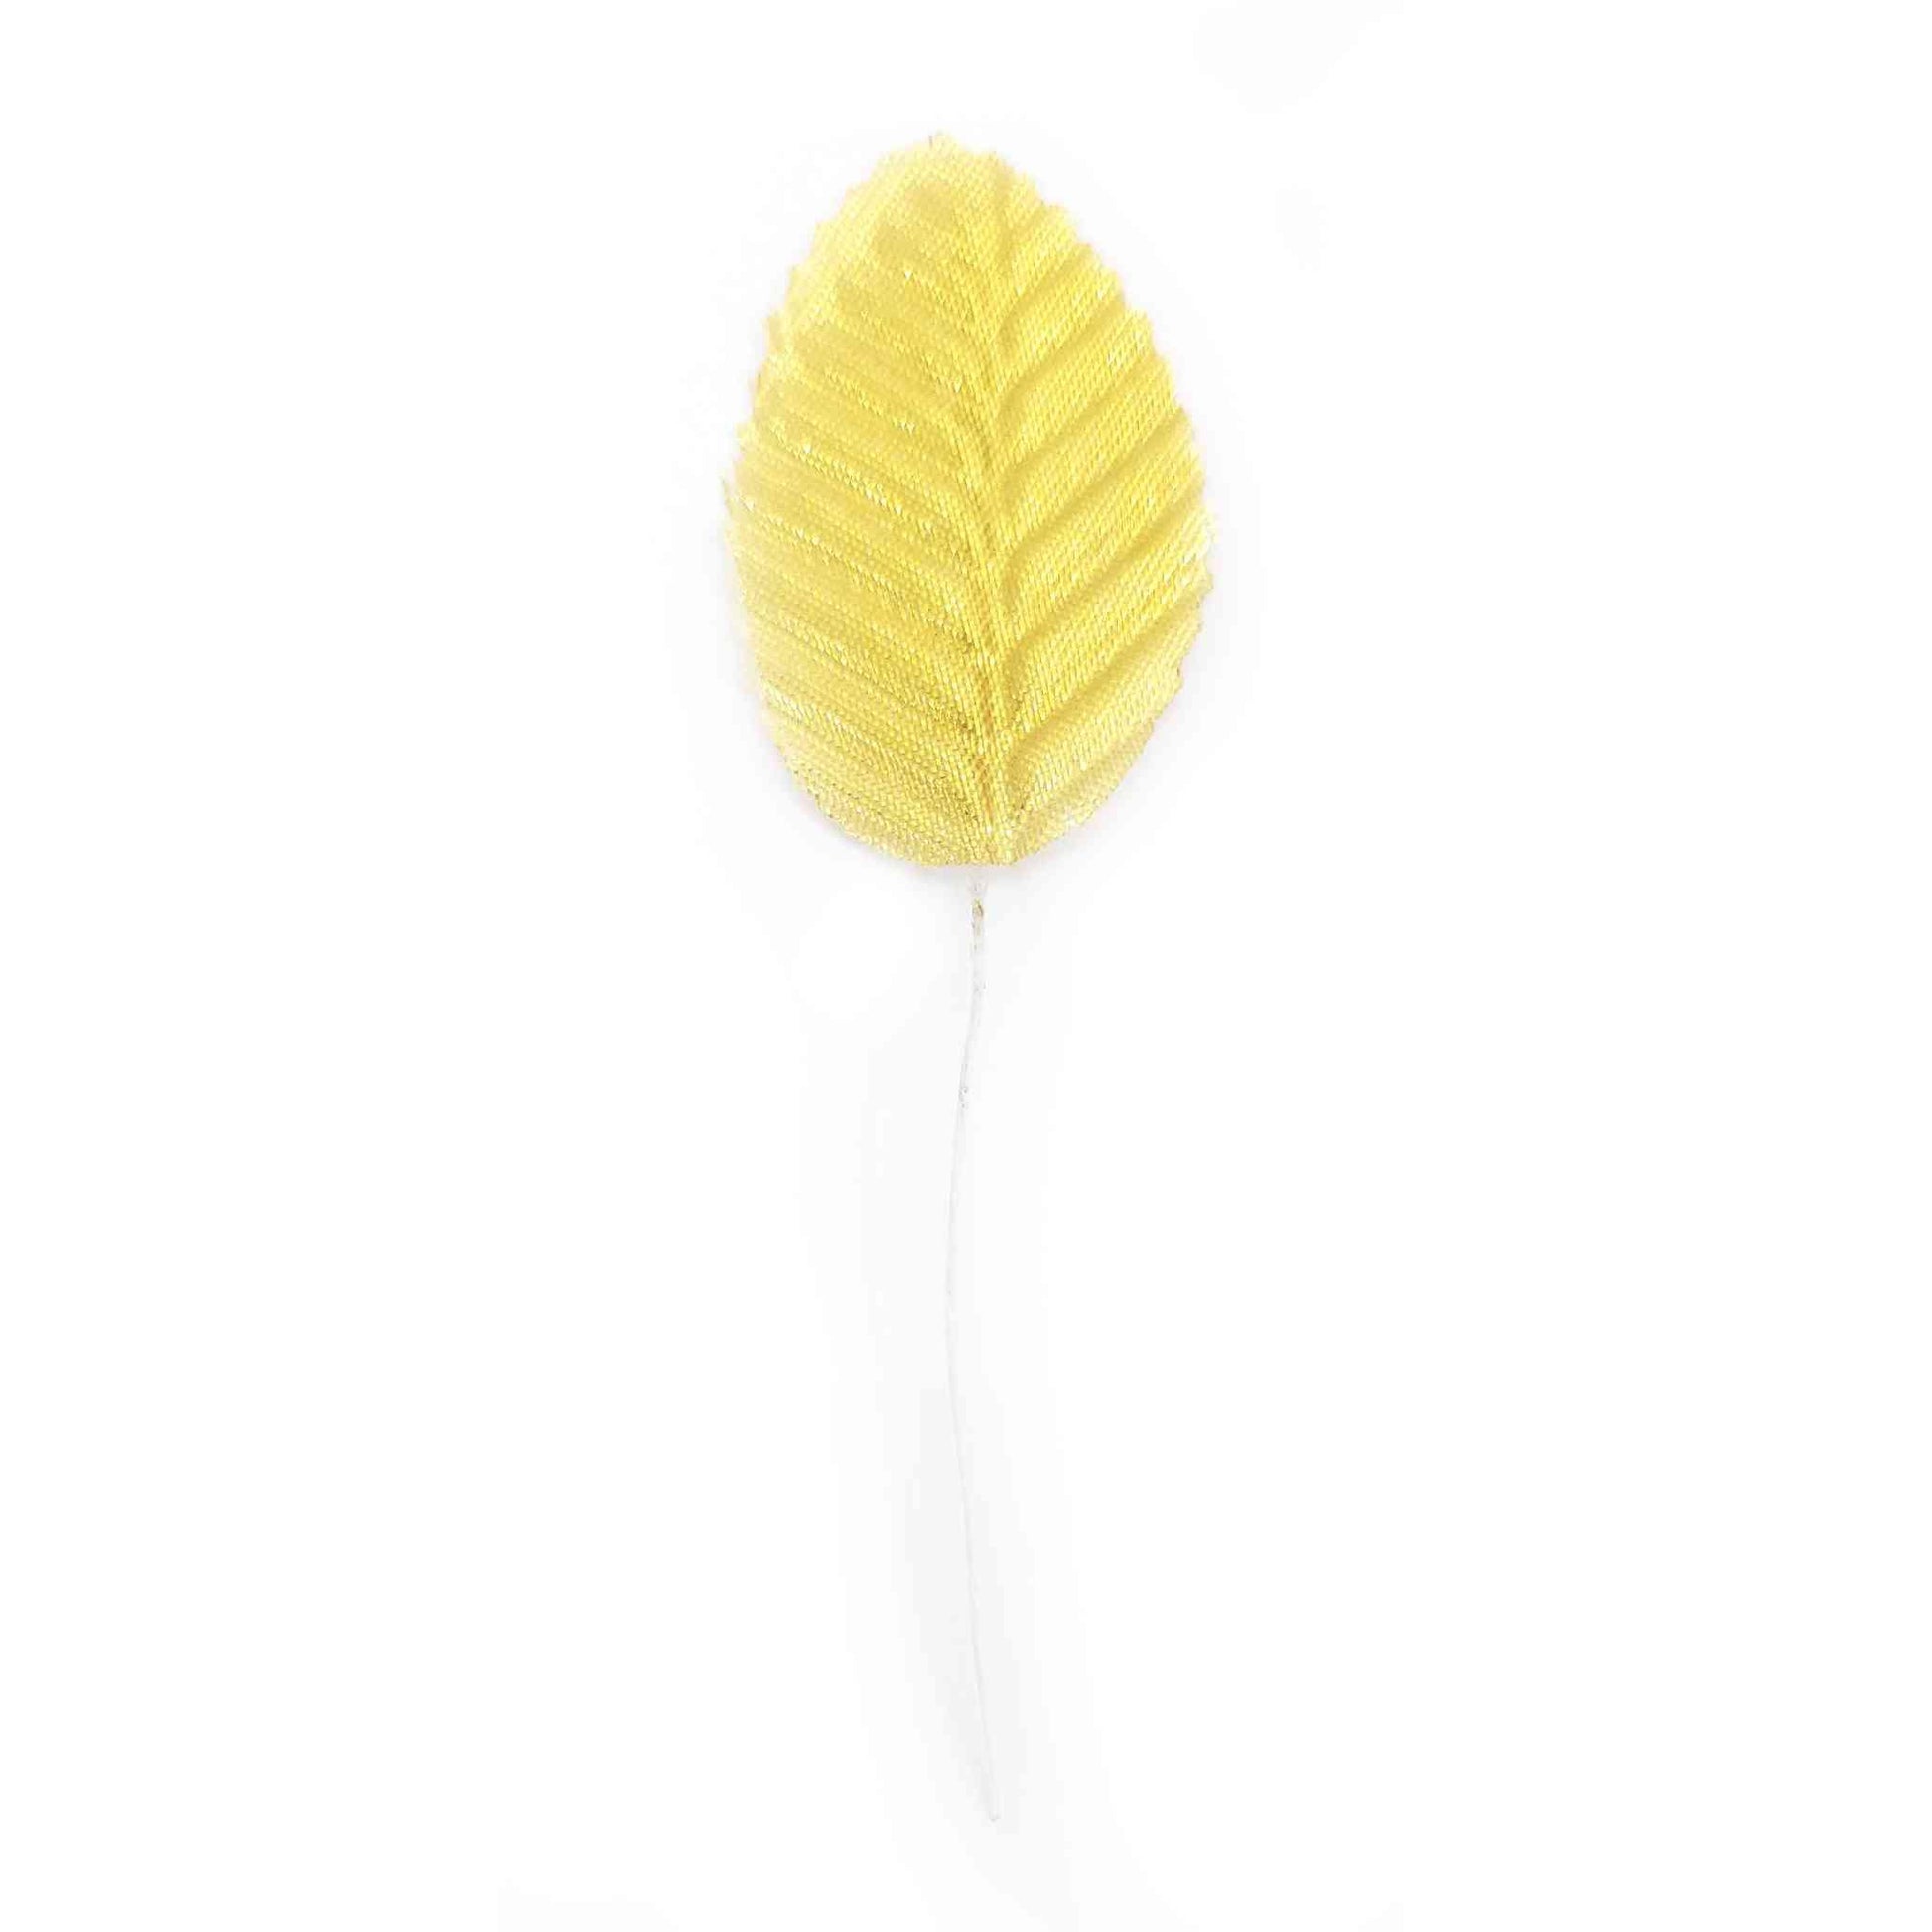 Beautiful Fabric Leaf for DIY Craft, Trouseau Packing or Decoration (Bunch of 12) - Design 60, Goldenrod - Indian Petals